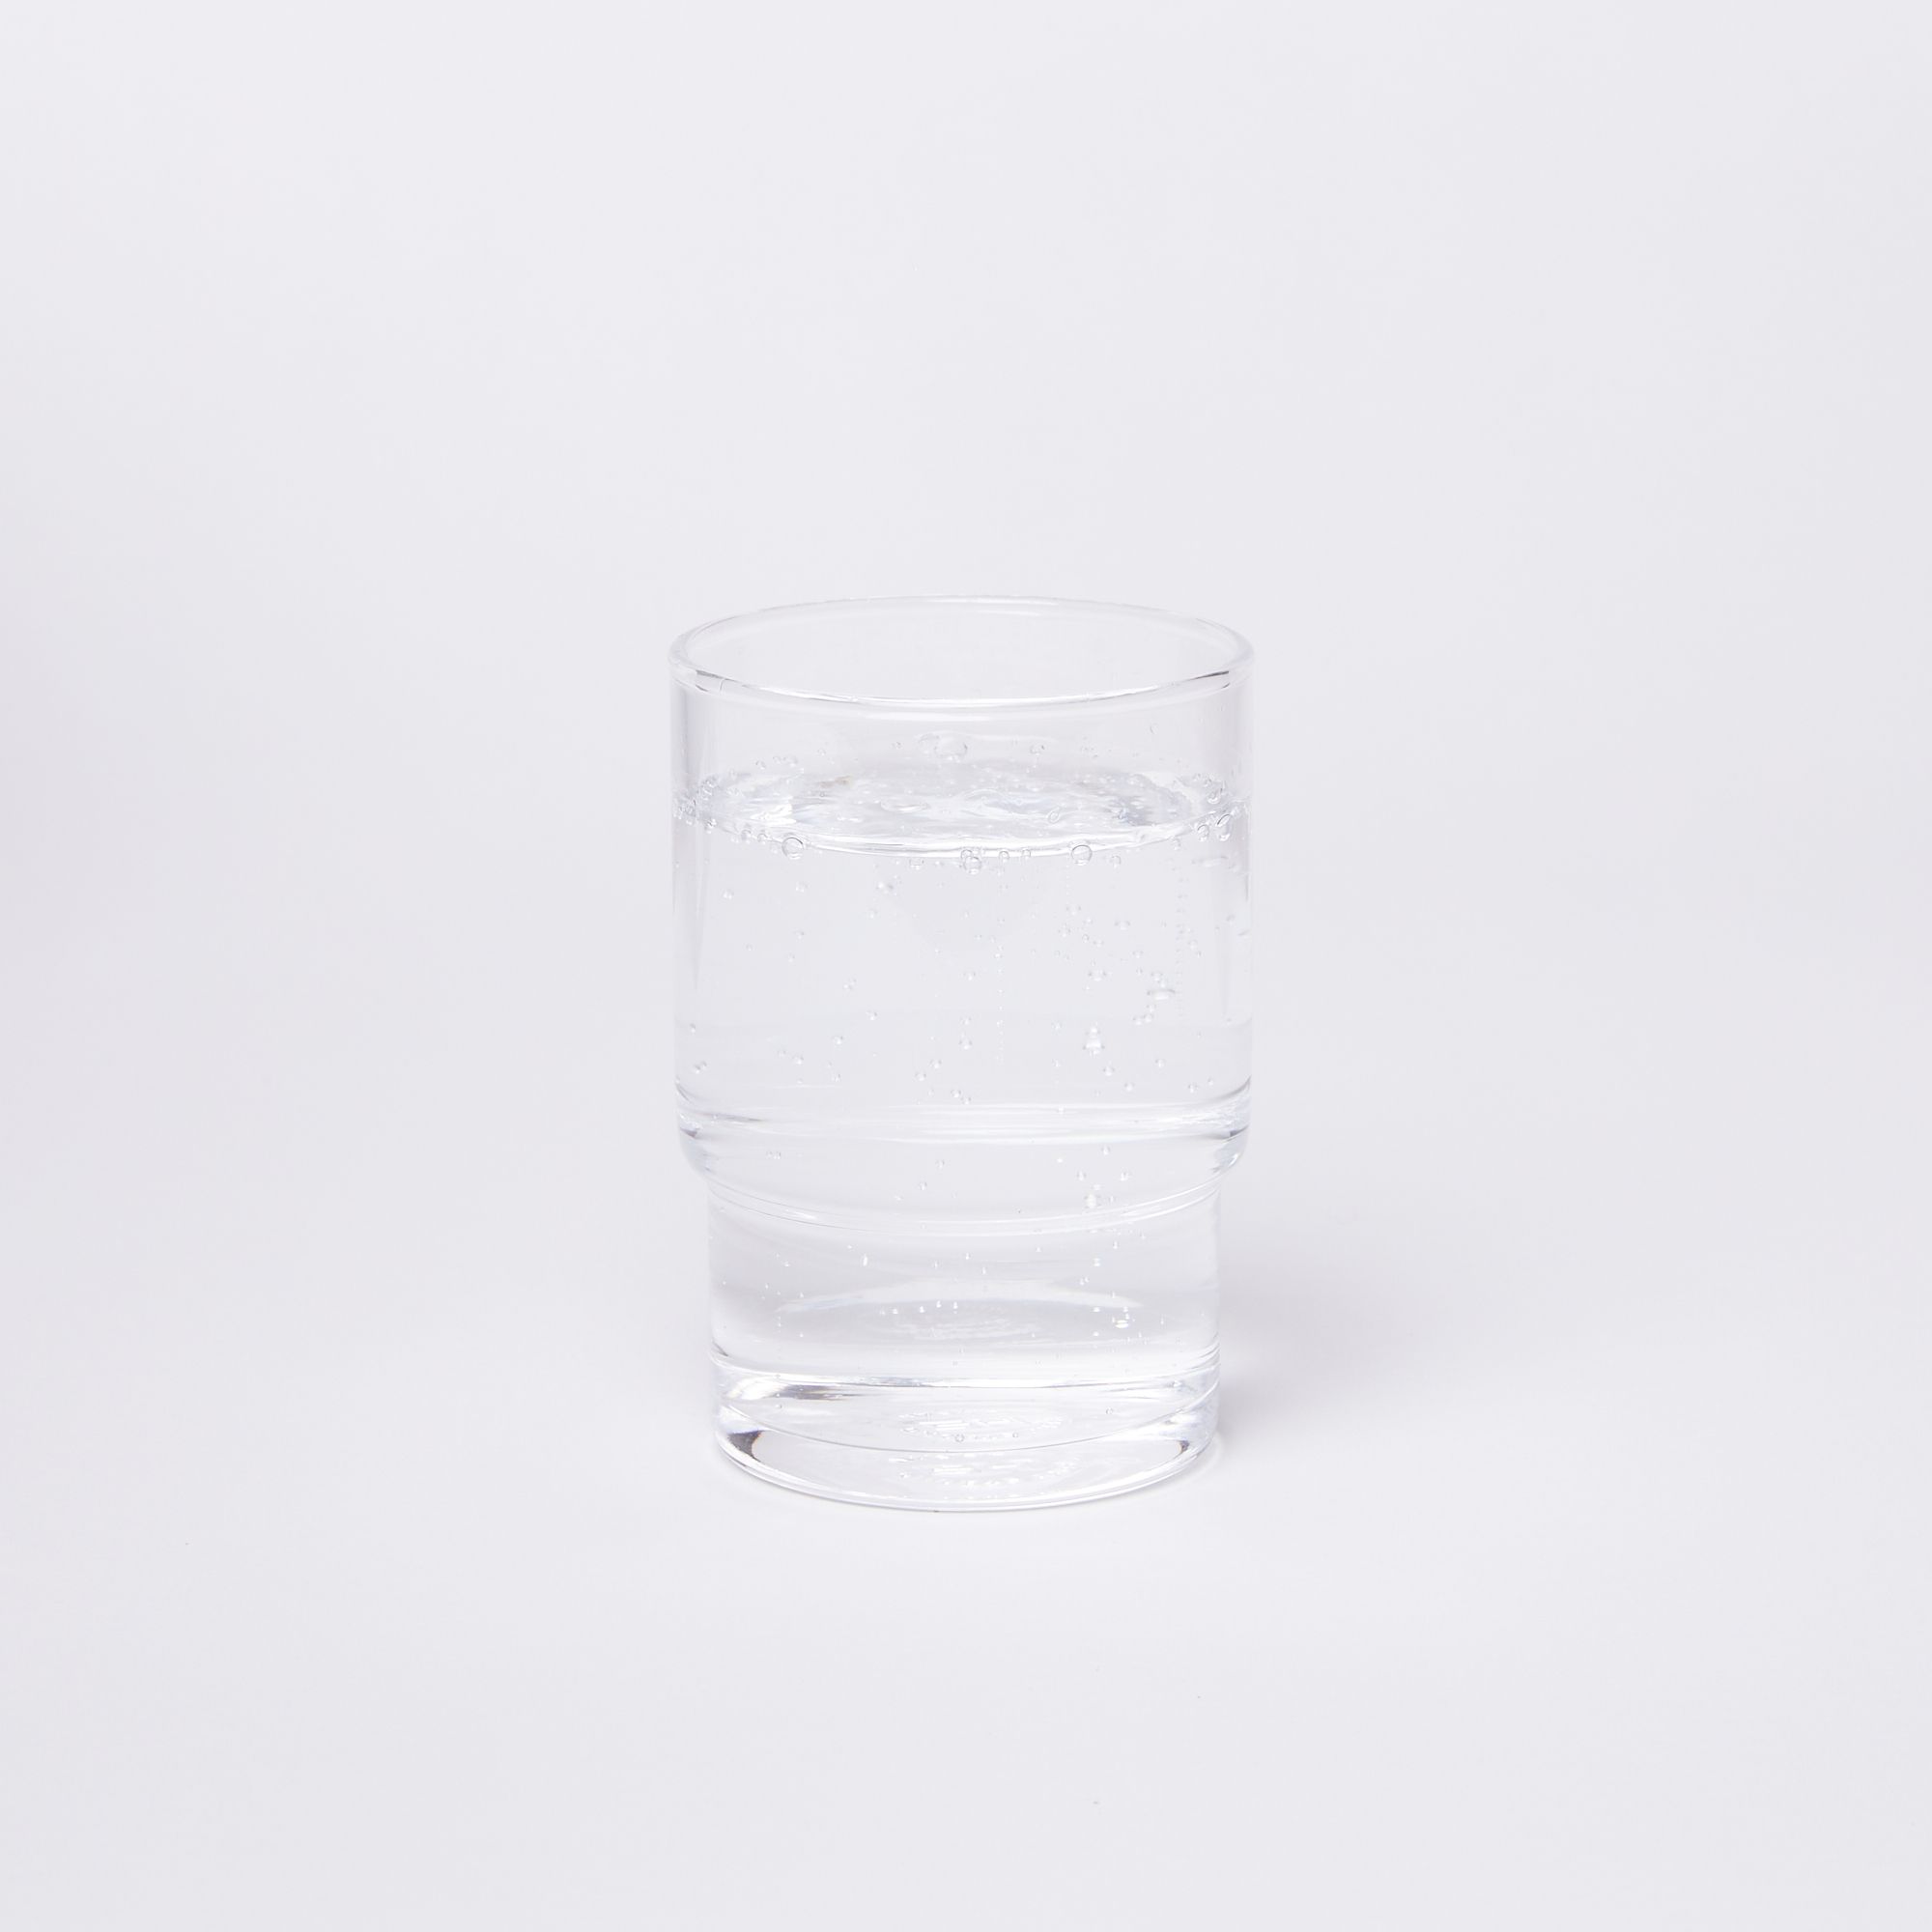 Clear cylindrical glass with a wider top half with a narrower bottom half, full of water